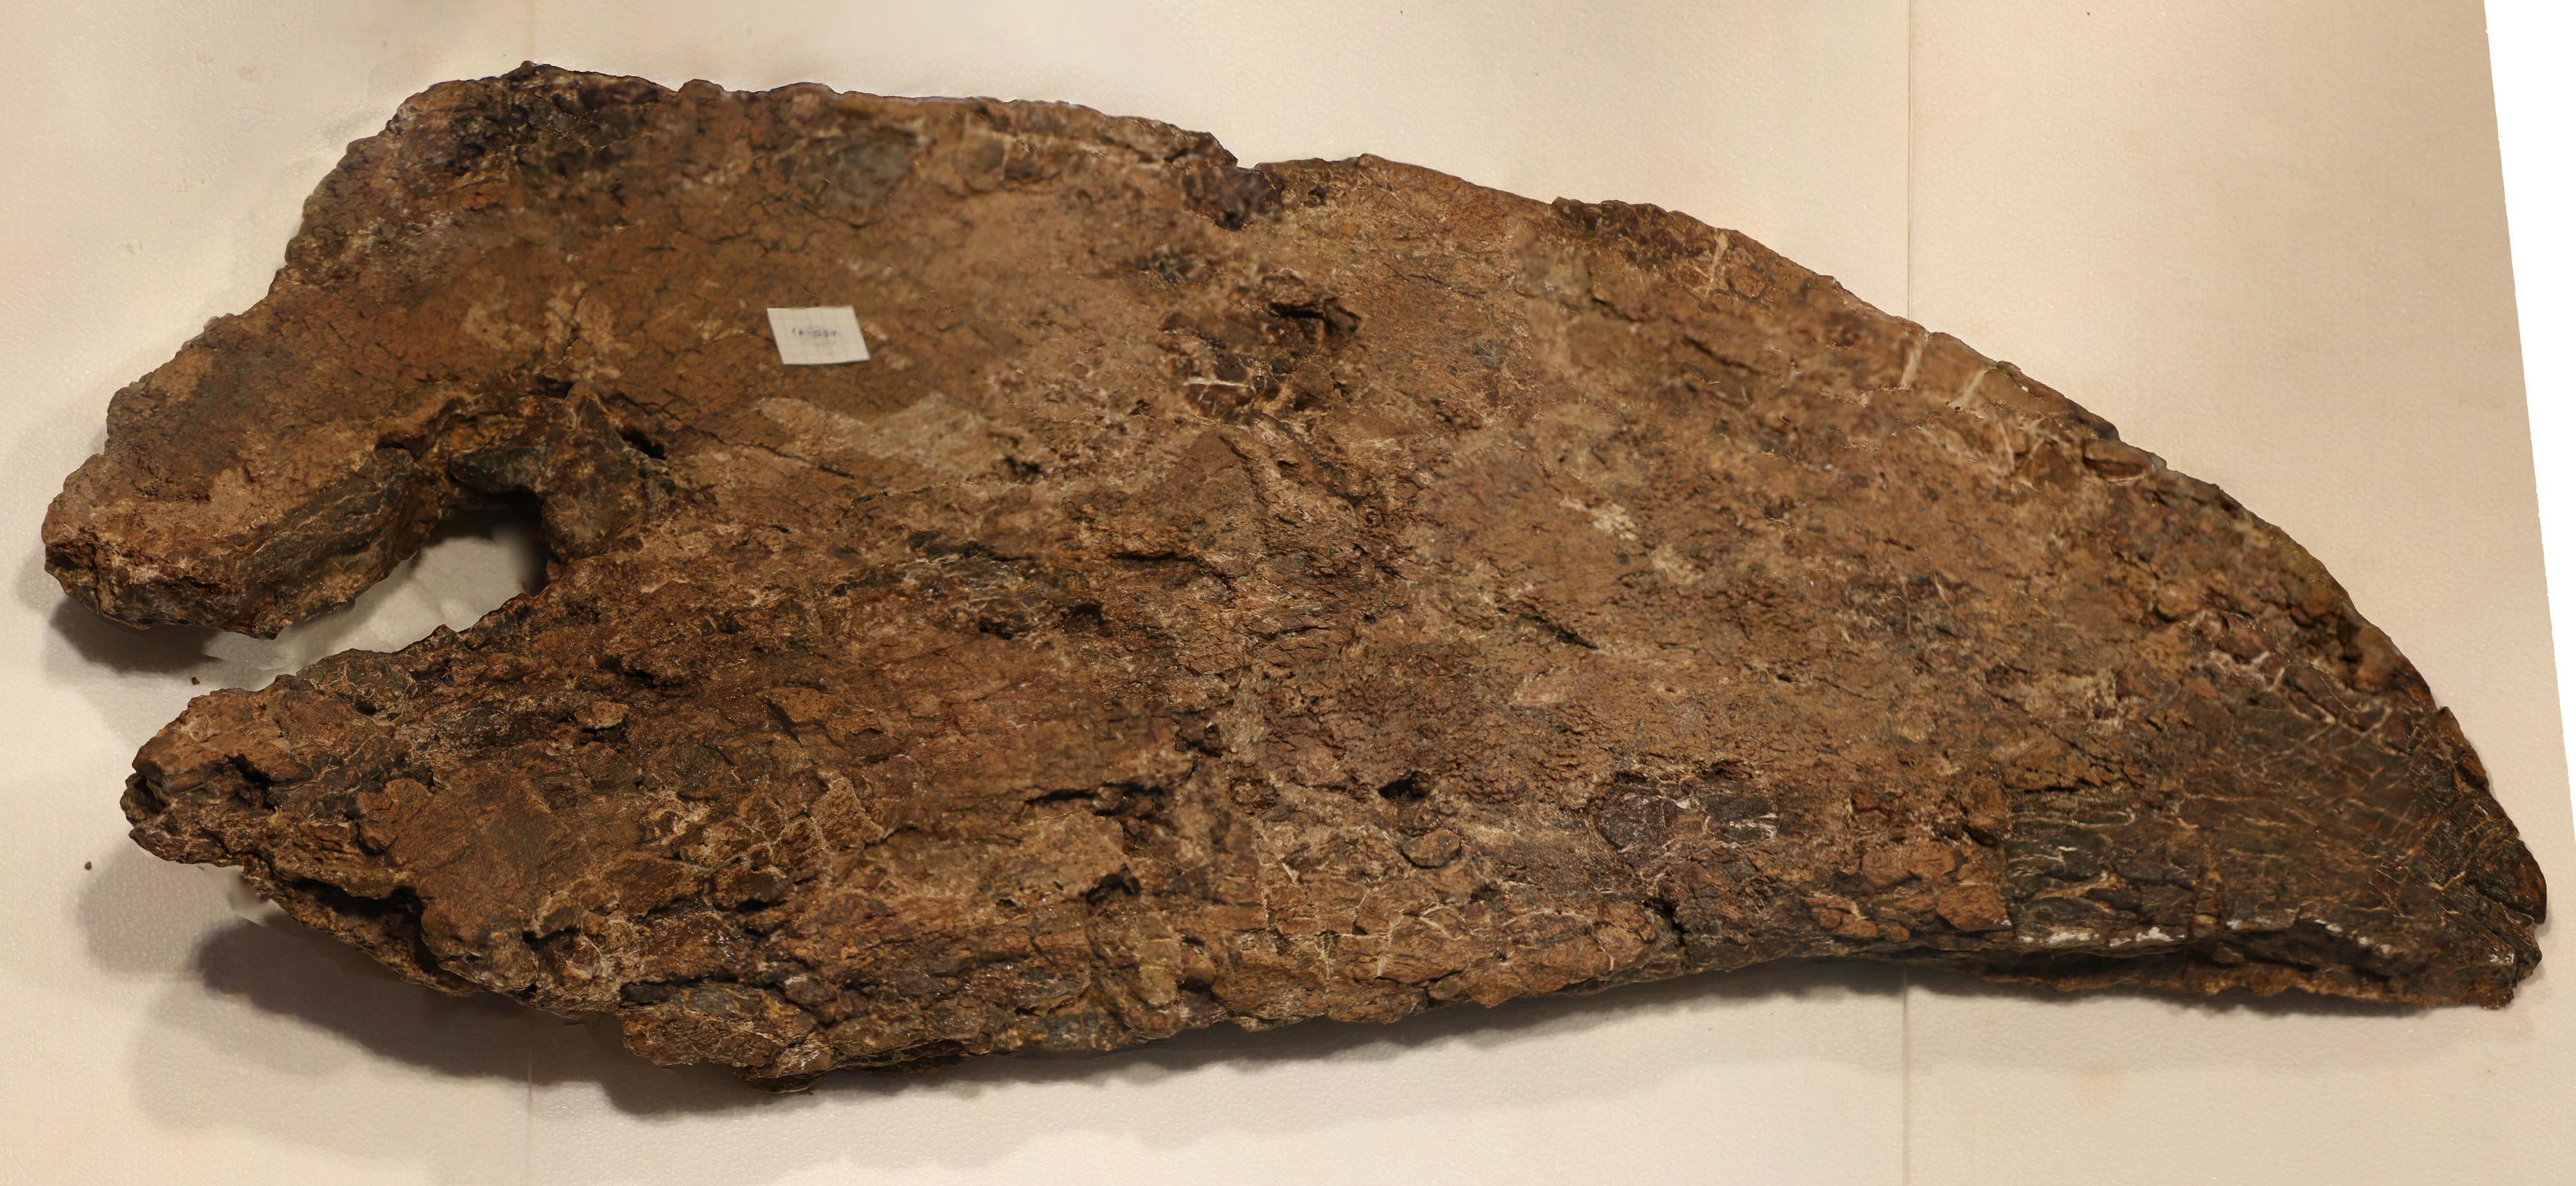 The fossilized squamosal bone of Big John showing the traumatic lesion. (Image: Zoic Limited Liability Company, (Trieste, Italy), to which one of the paper authors (Flavio Bacchia) belongs.)